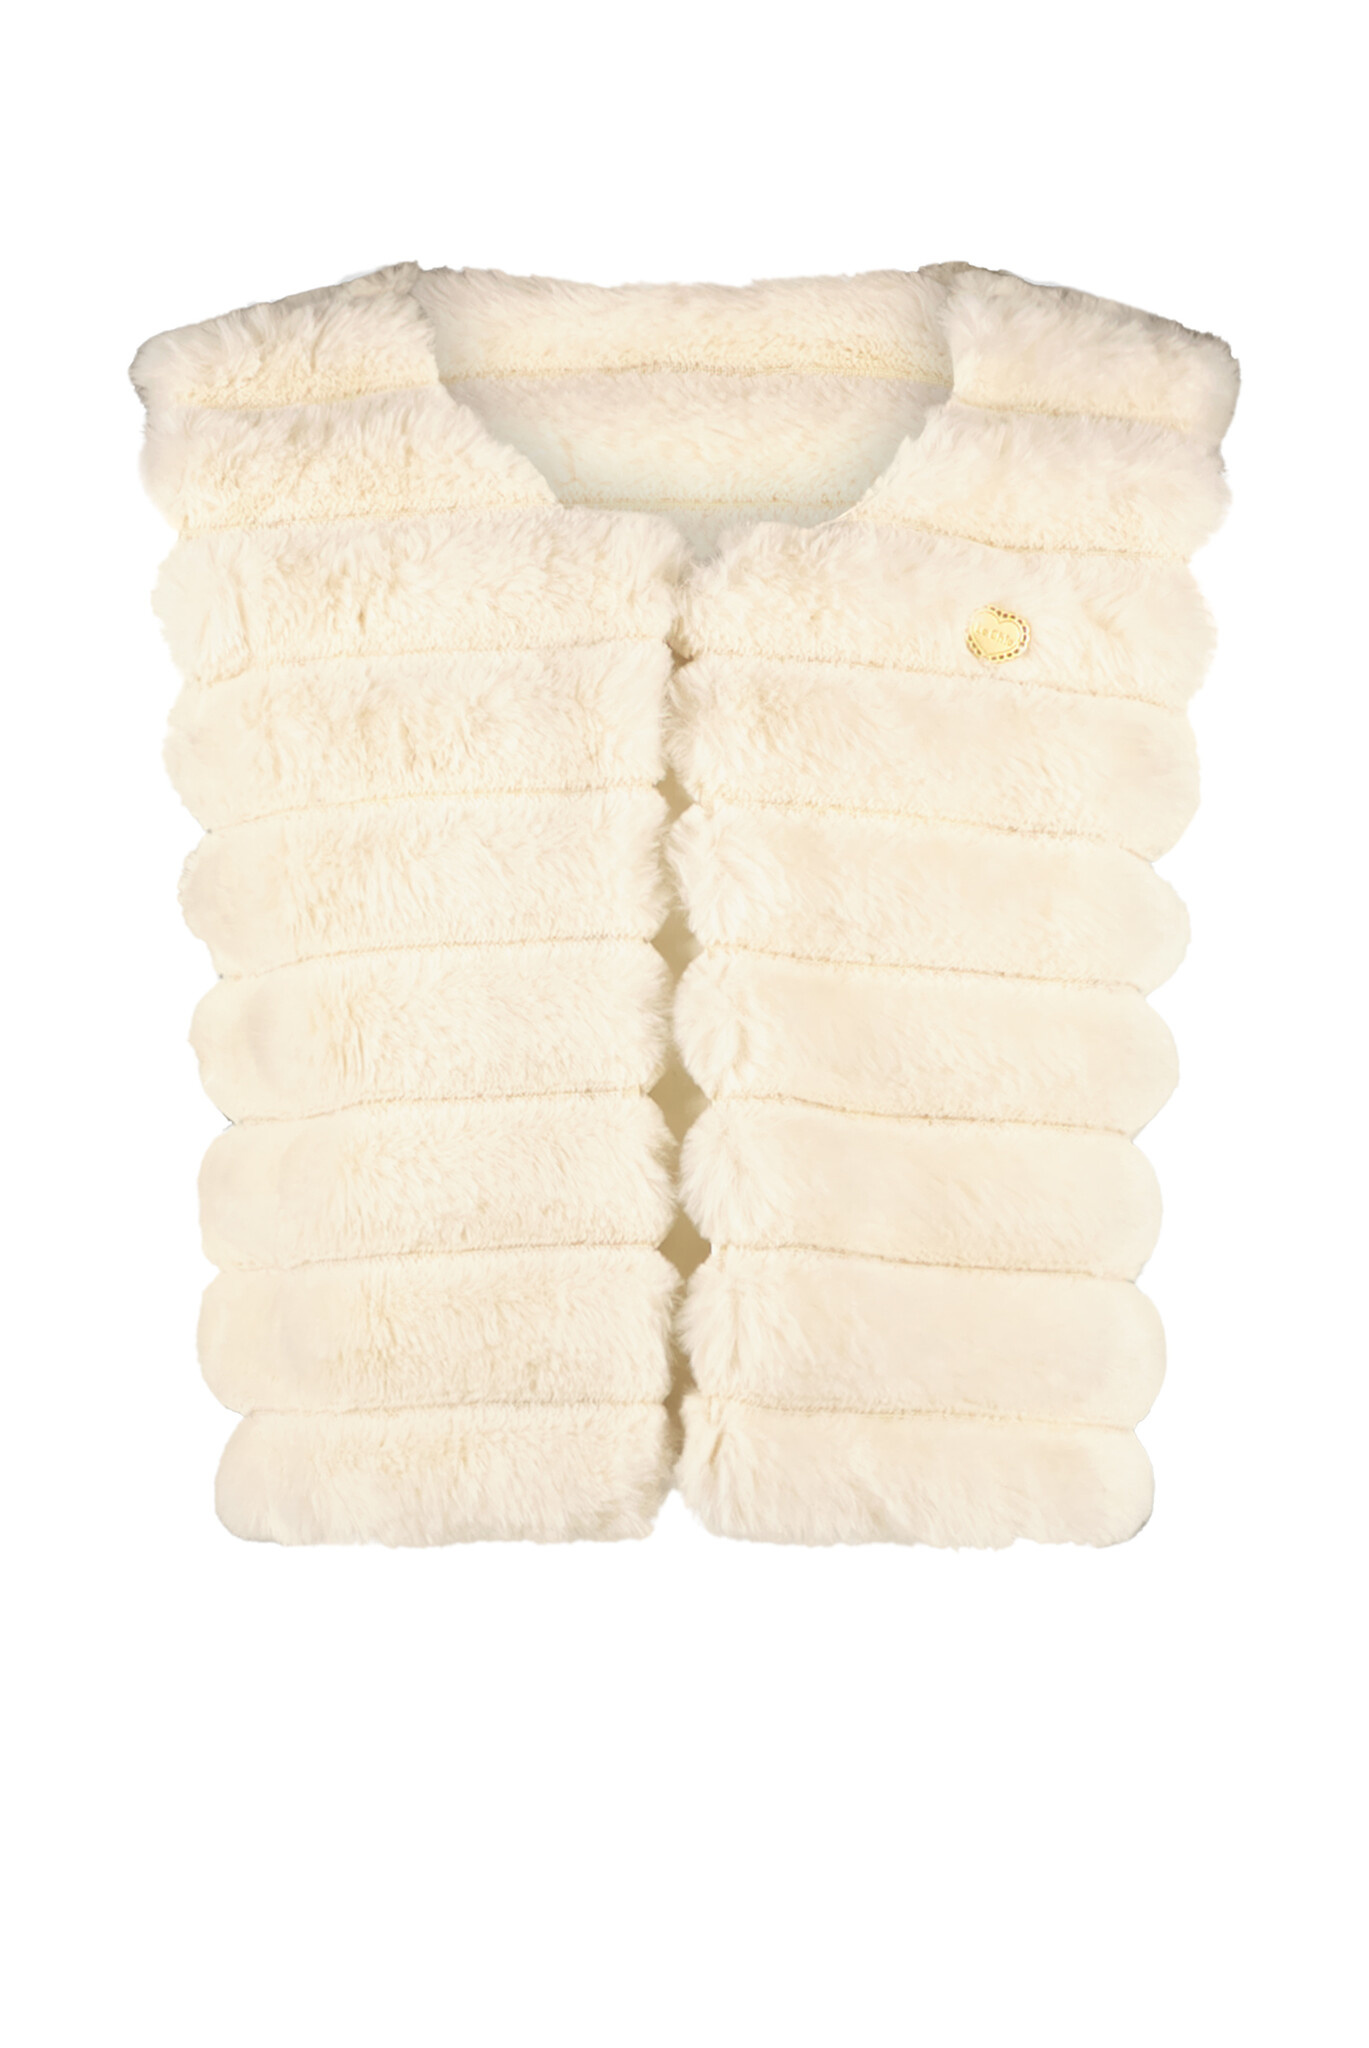 Le Chic C308-5106 Meisjes Gilet - Pearled Ivory - Maat 140